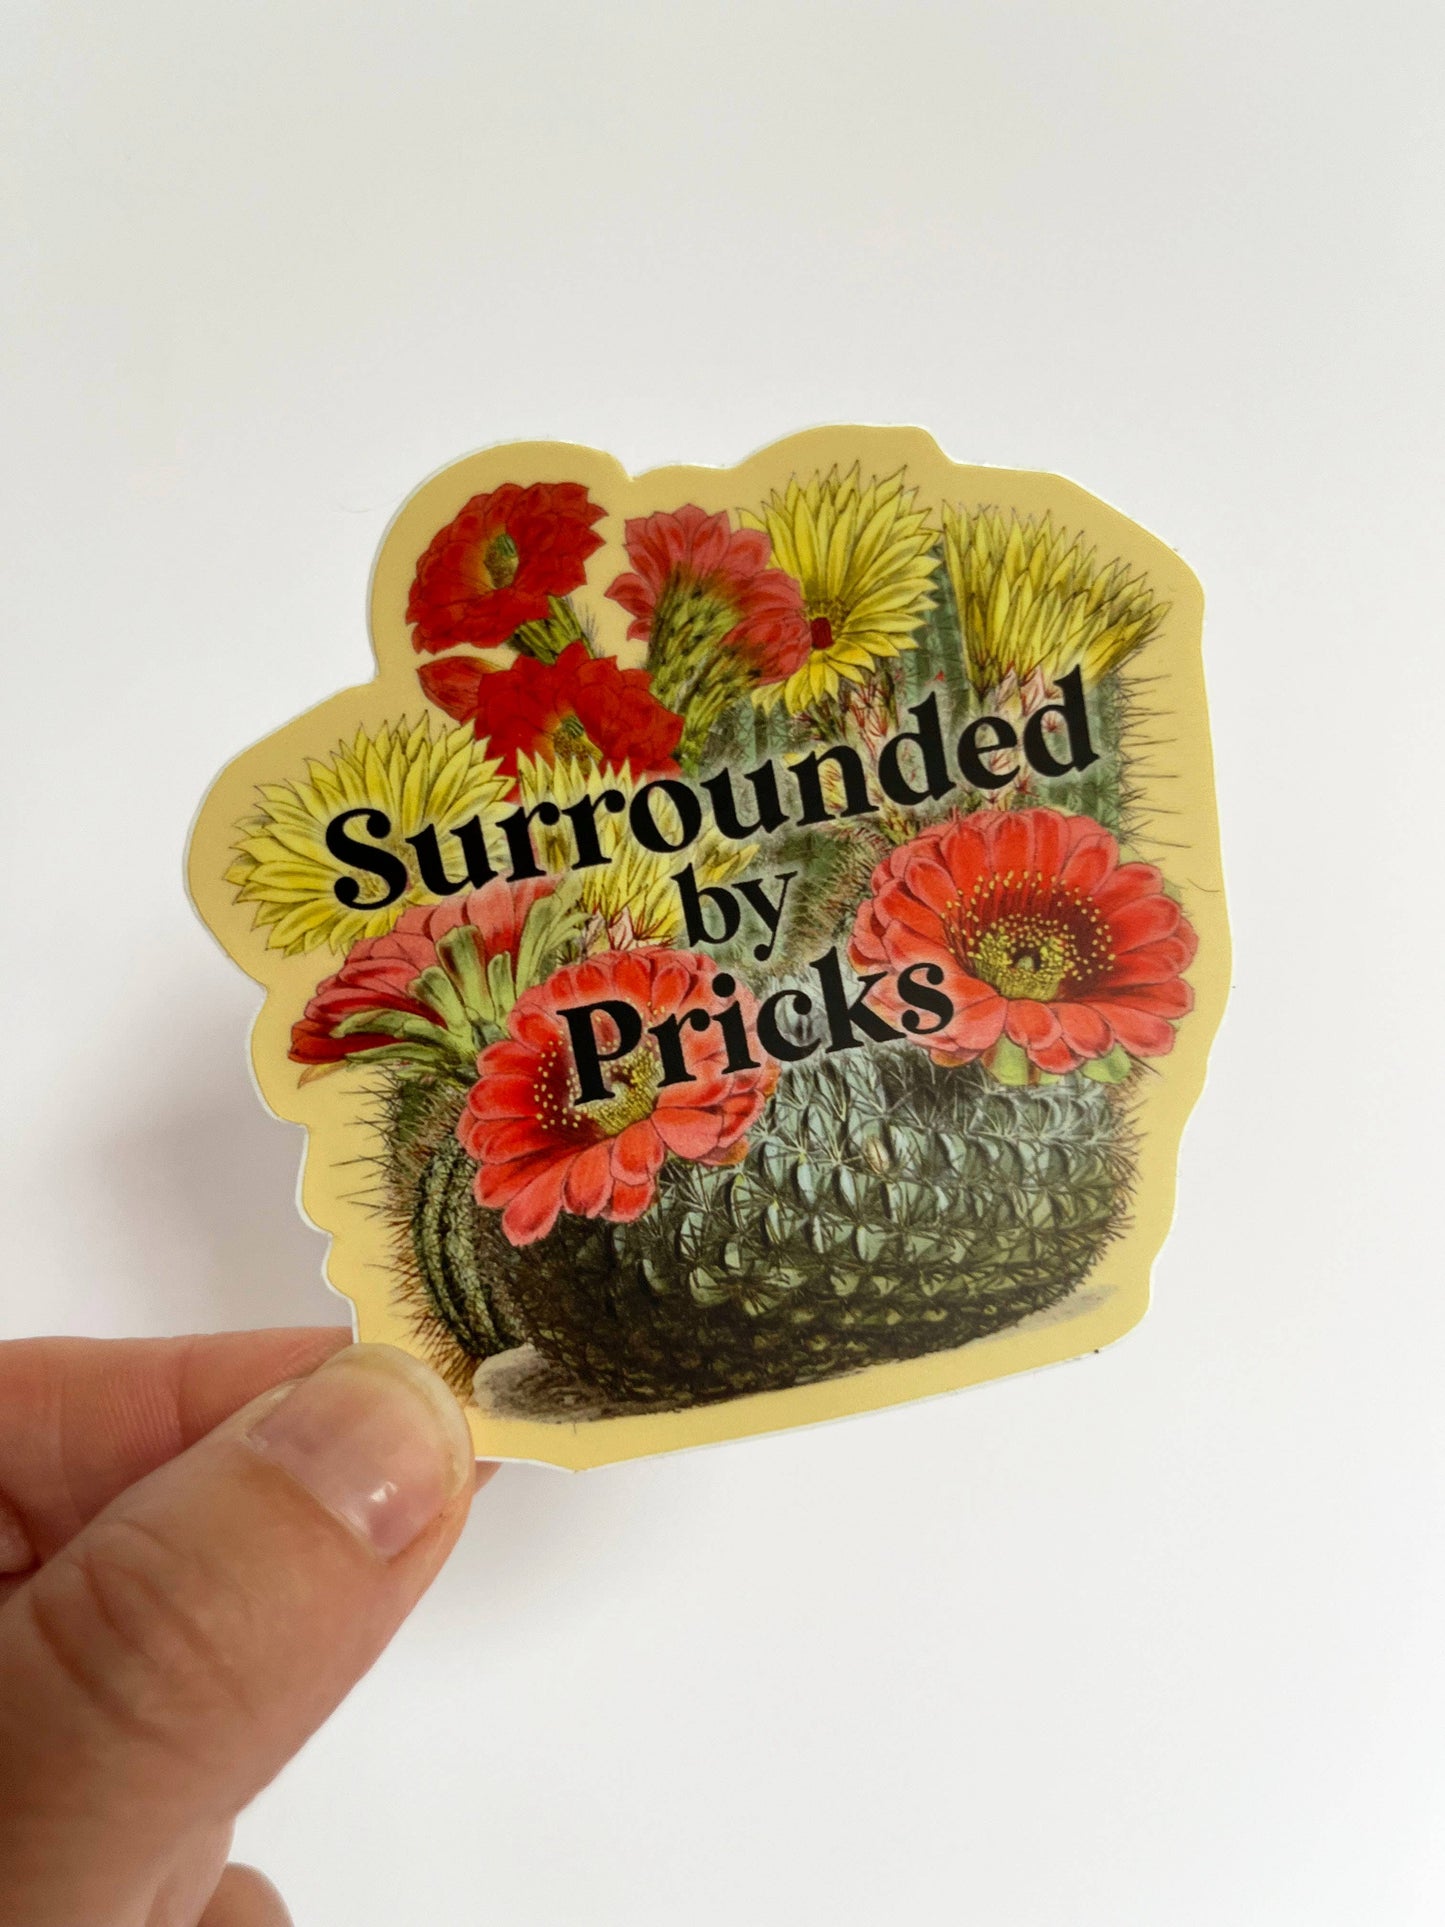 Surrounded by Pricks Sticker - Funny Cactus Decal